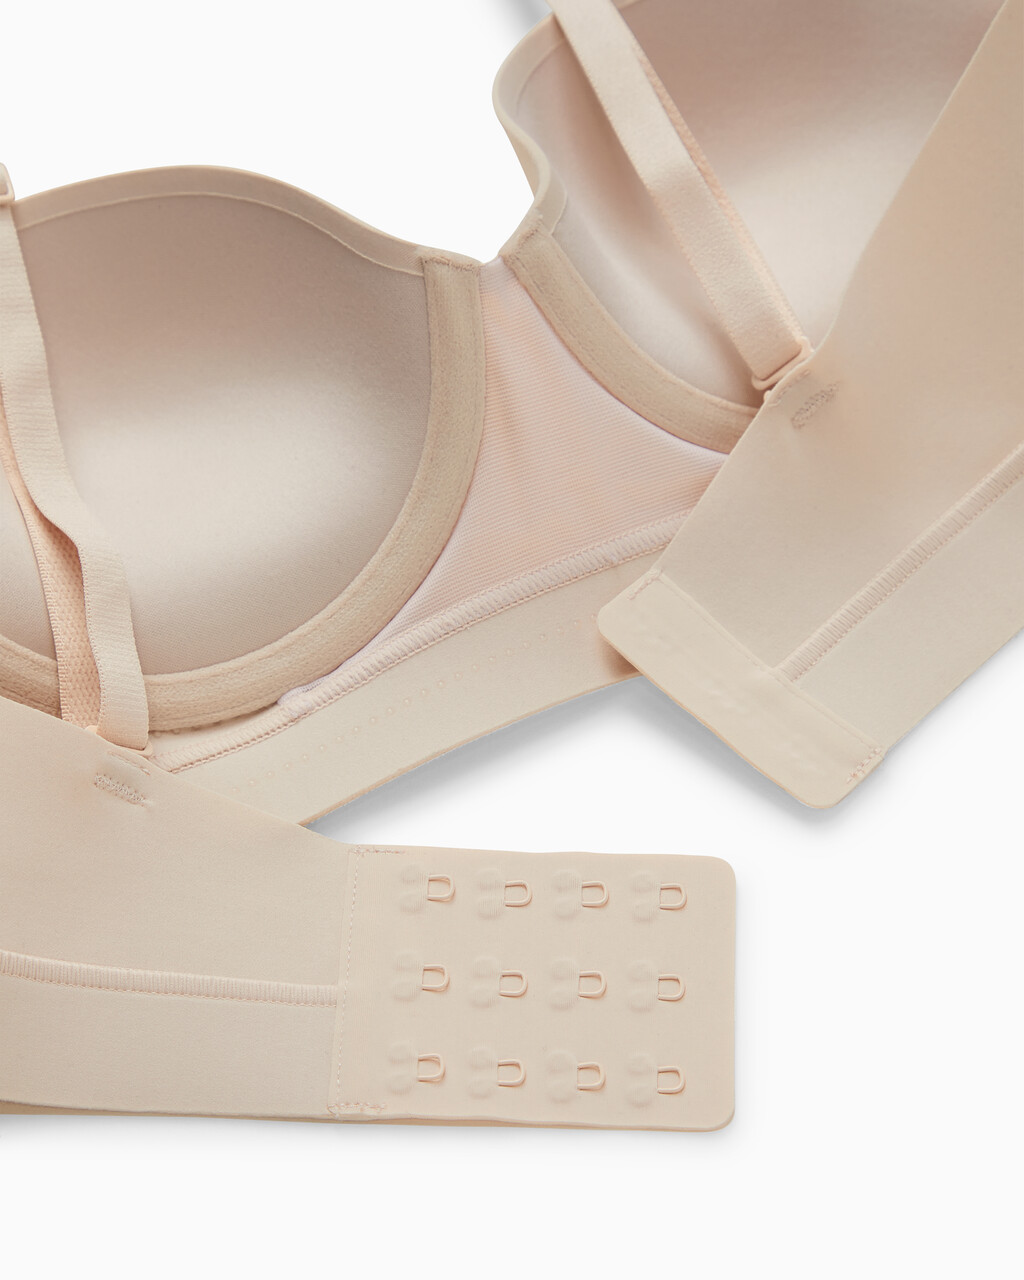 Invisibles Push Up Strapless Bra, BEECHWOOD, hi-res